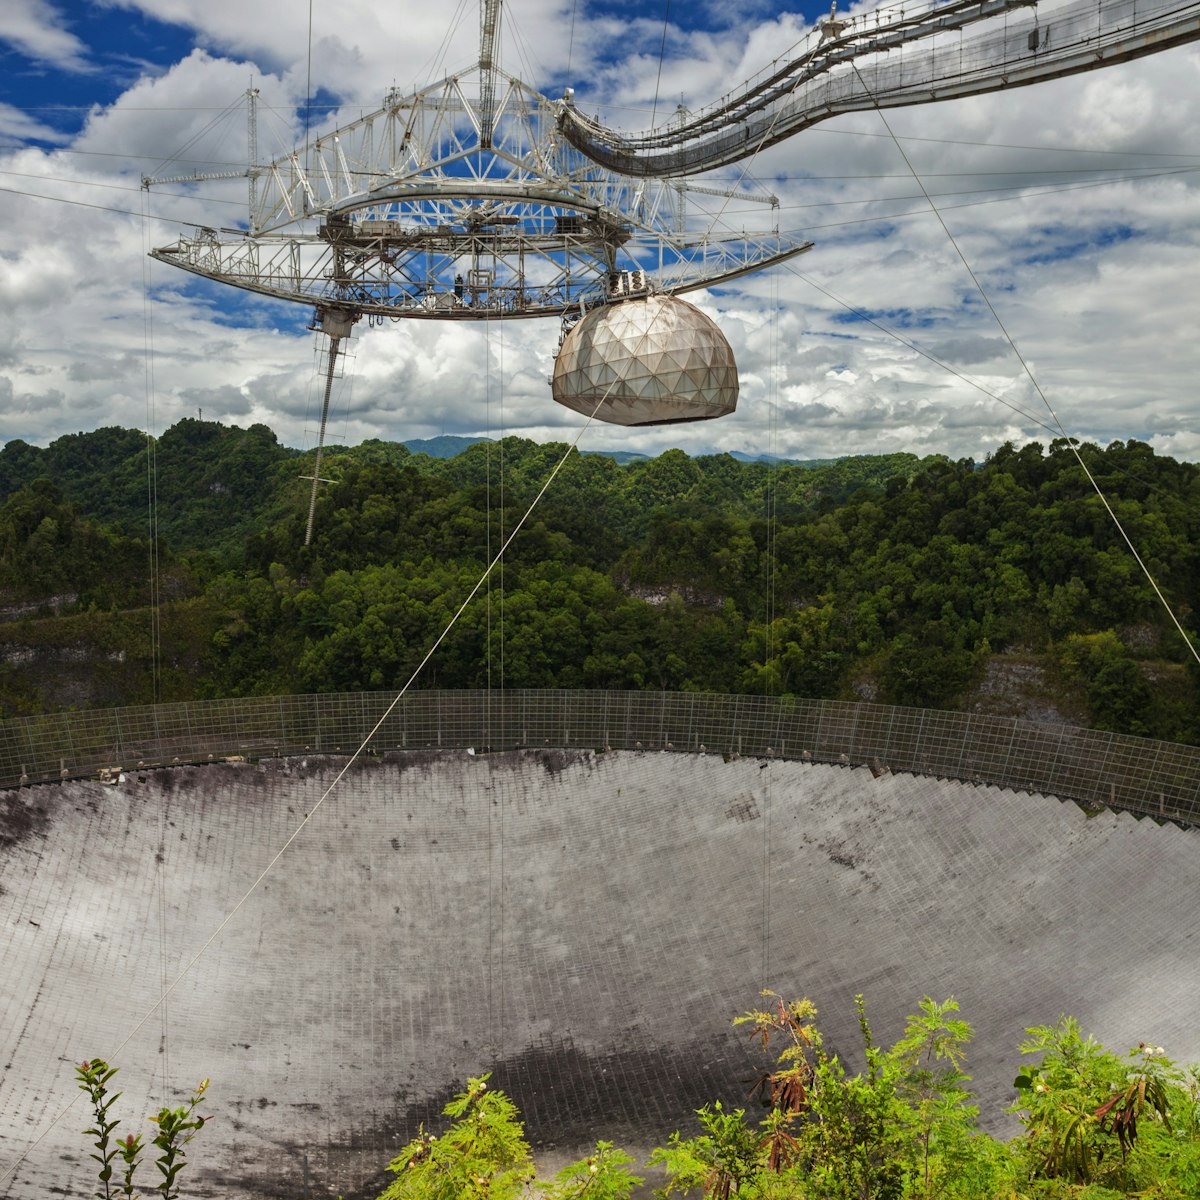 Worlds largest single-dish radio telescope, the Arecibo Observatory, Arecibo, Puerto Rico. (Photo by: Universal Images Group via Getty Images)